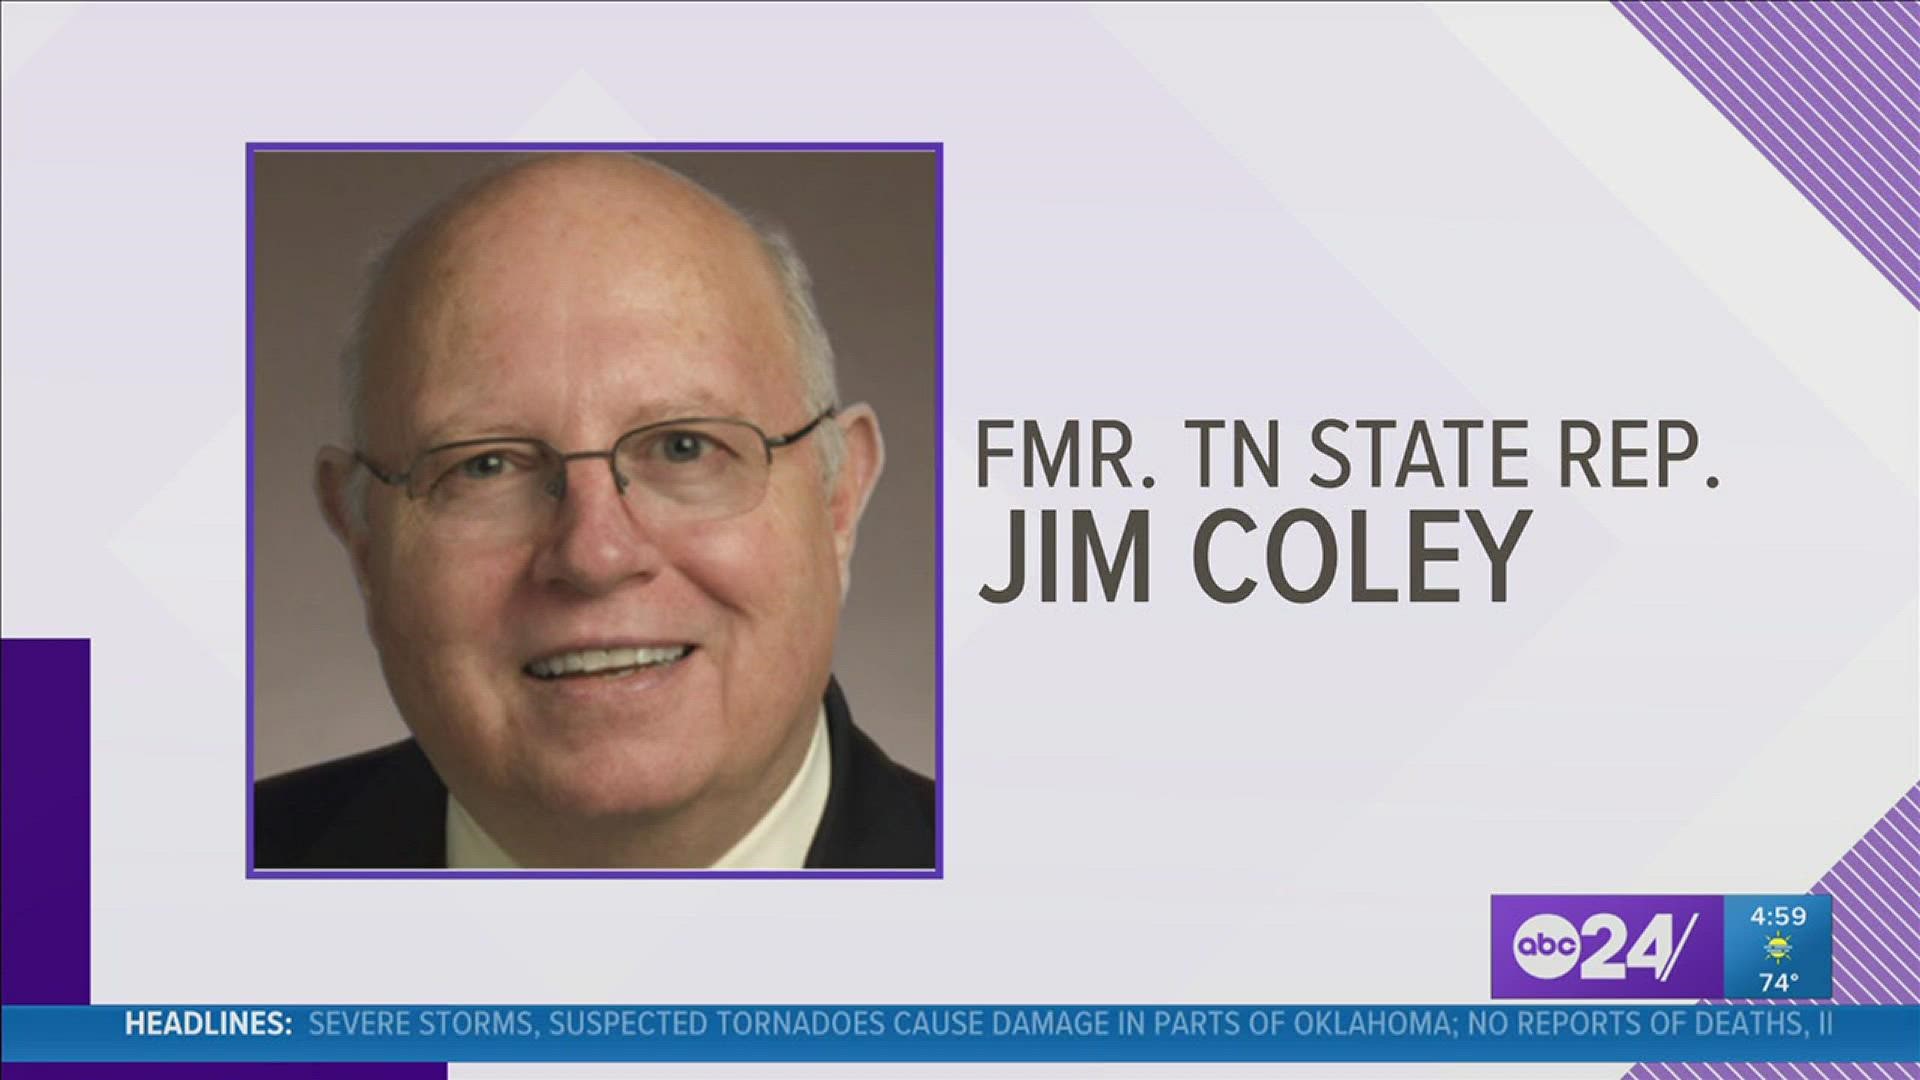 Coley served in the Tennessee State House from 2006 - 2020